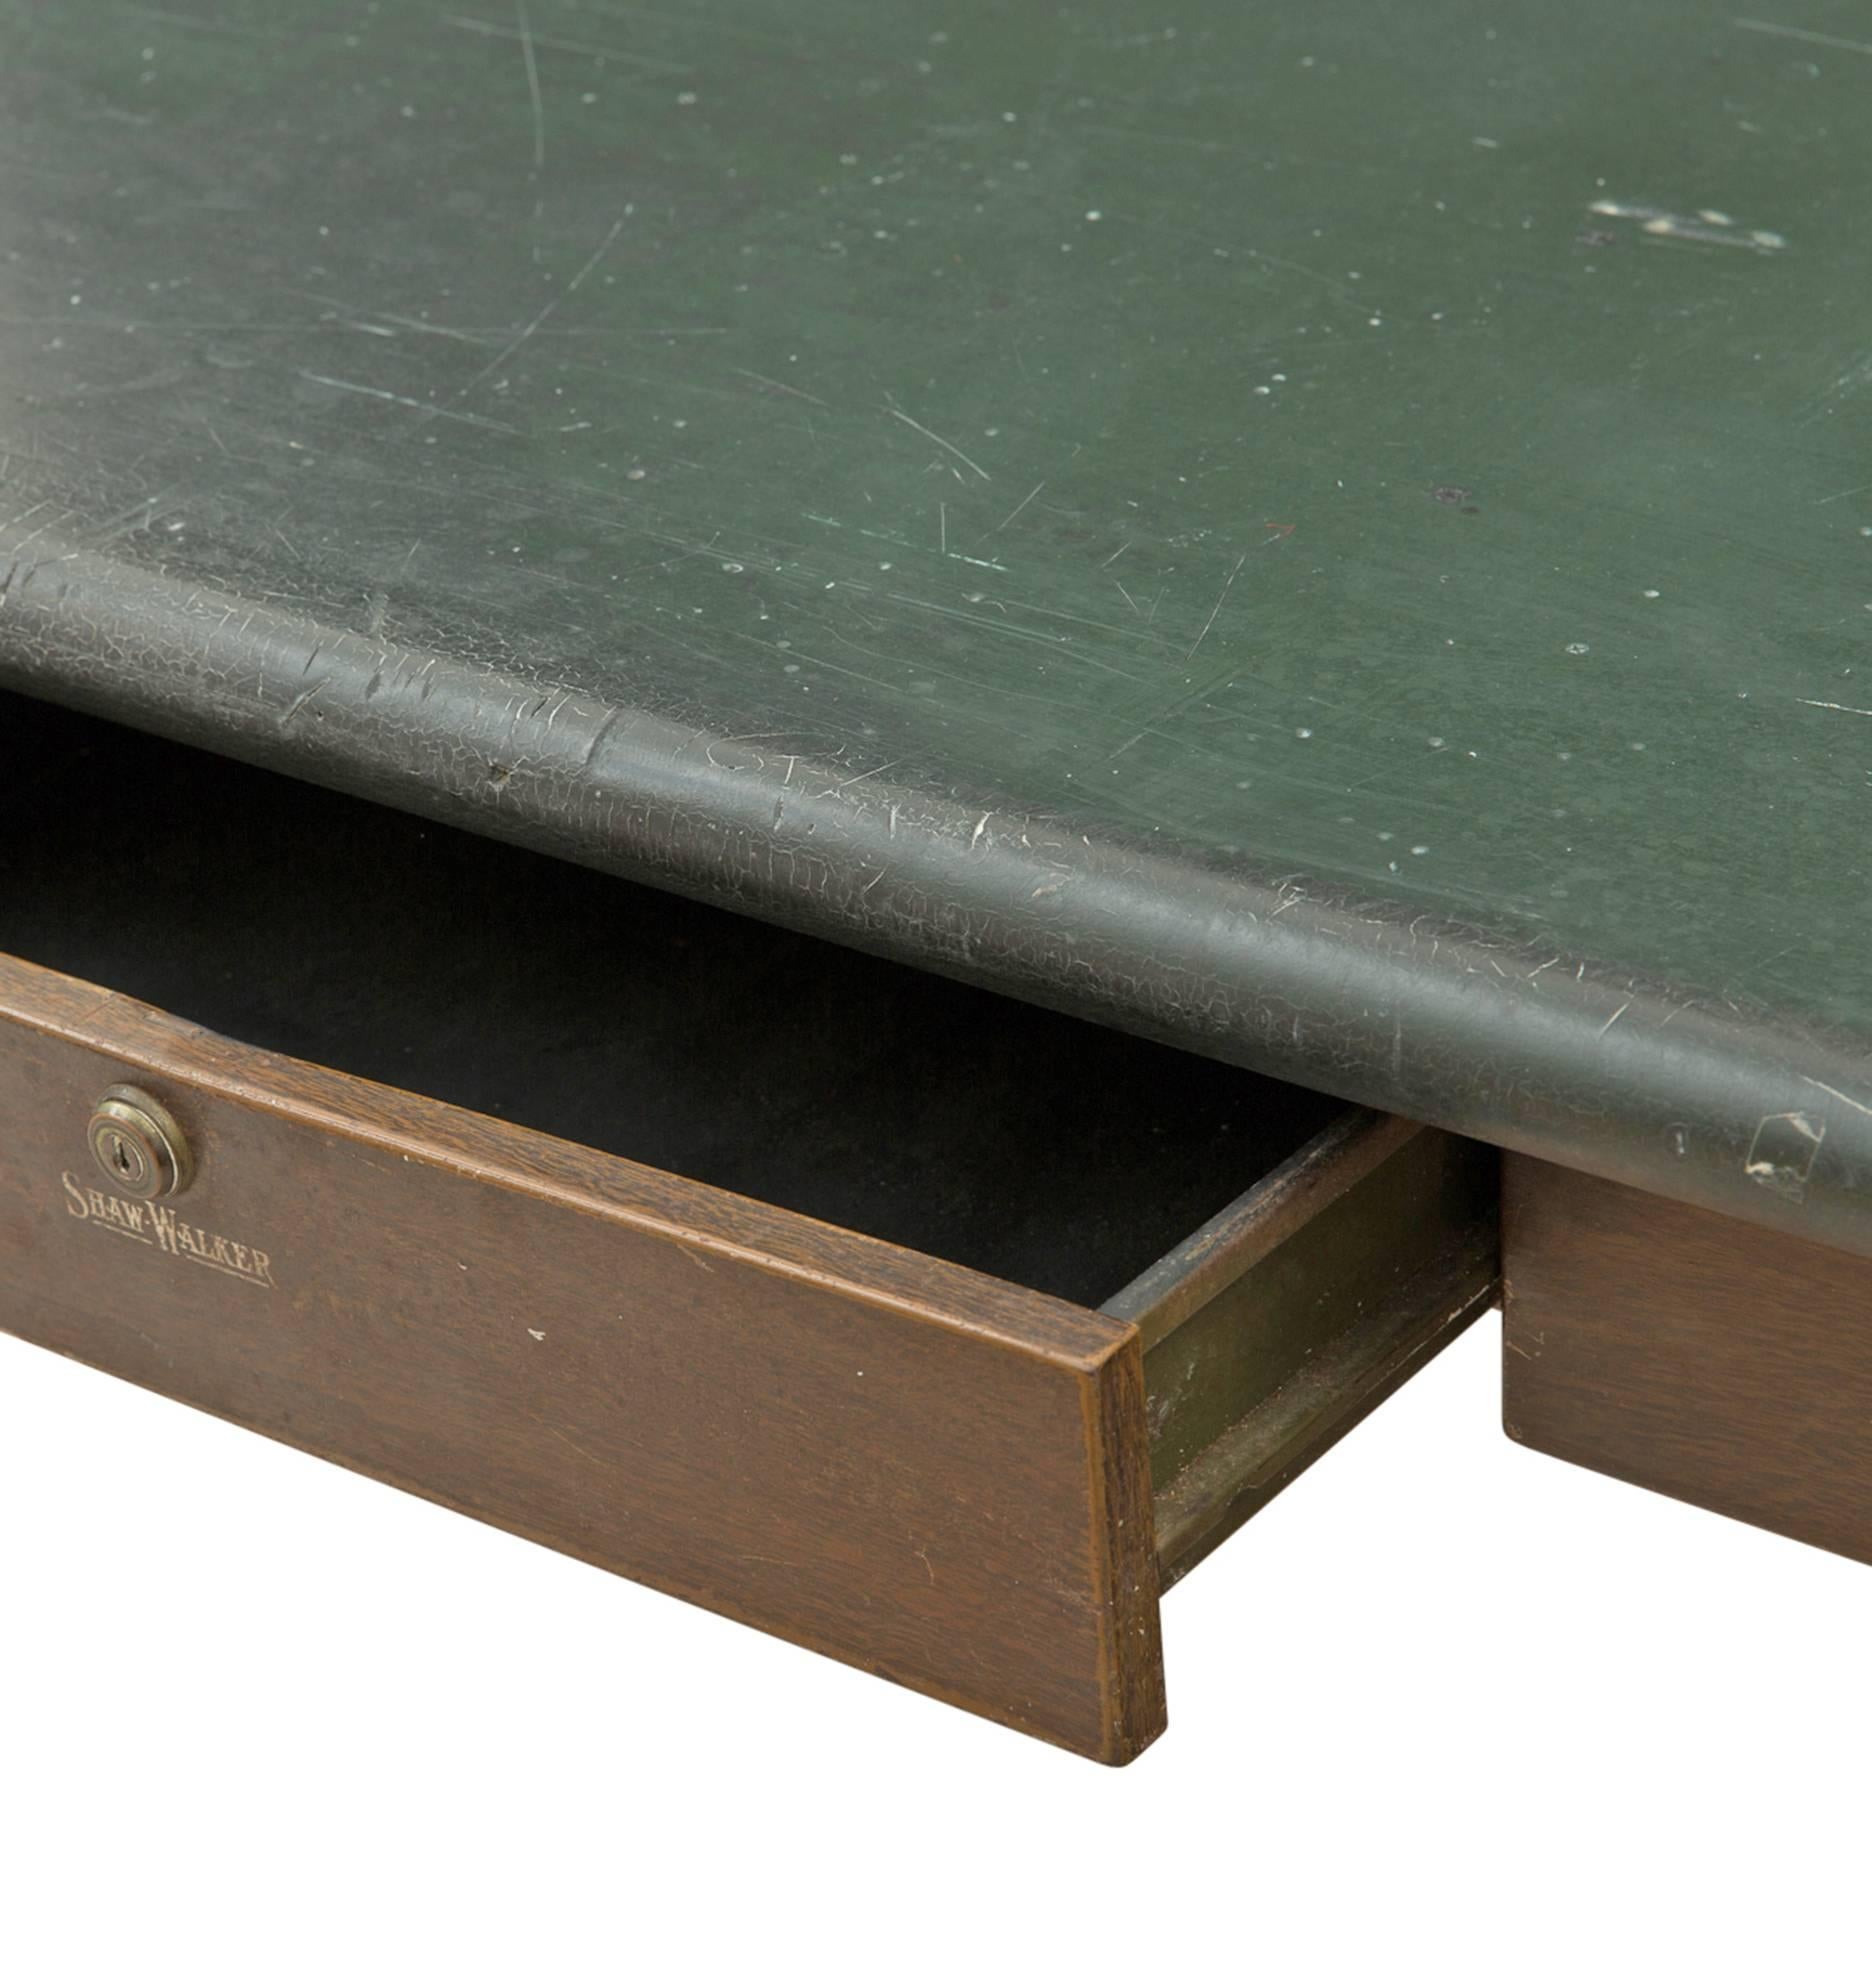 Mid-20th Century Steel Shaw Walker Table with Faux Wood Grain Base, circa 1950s For Sale